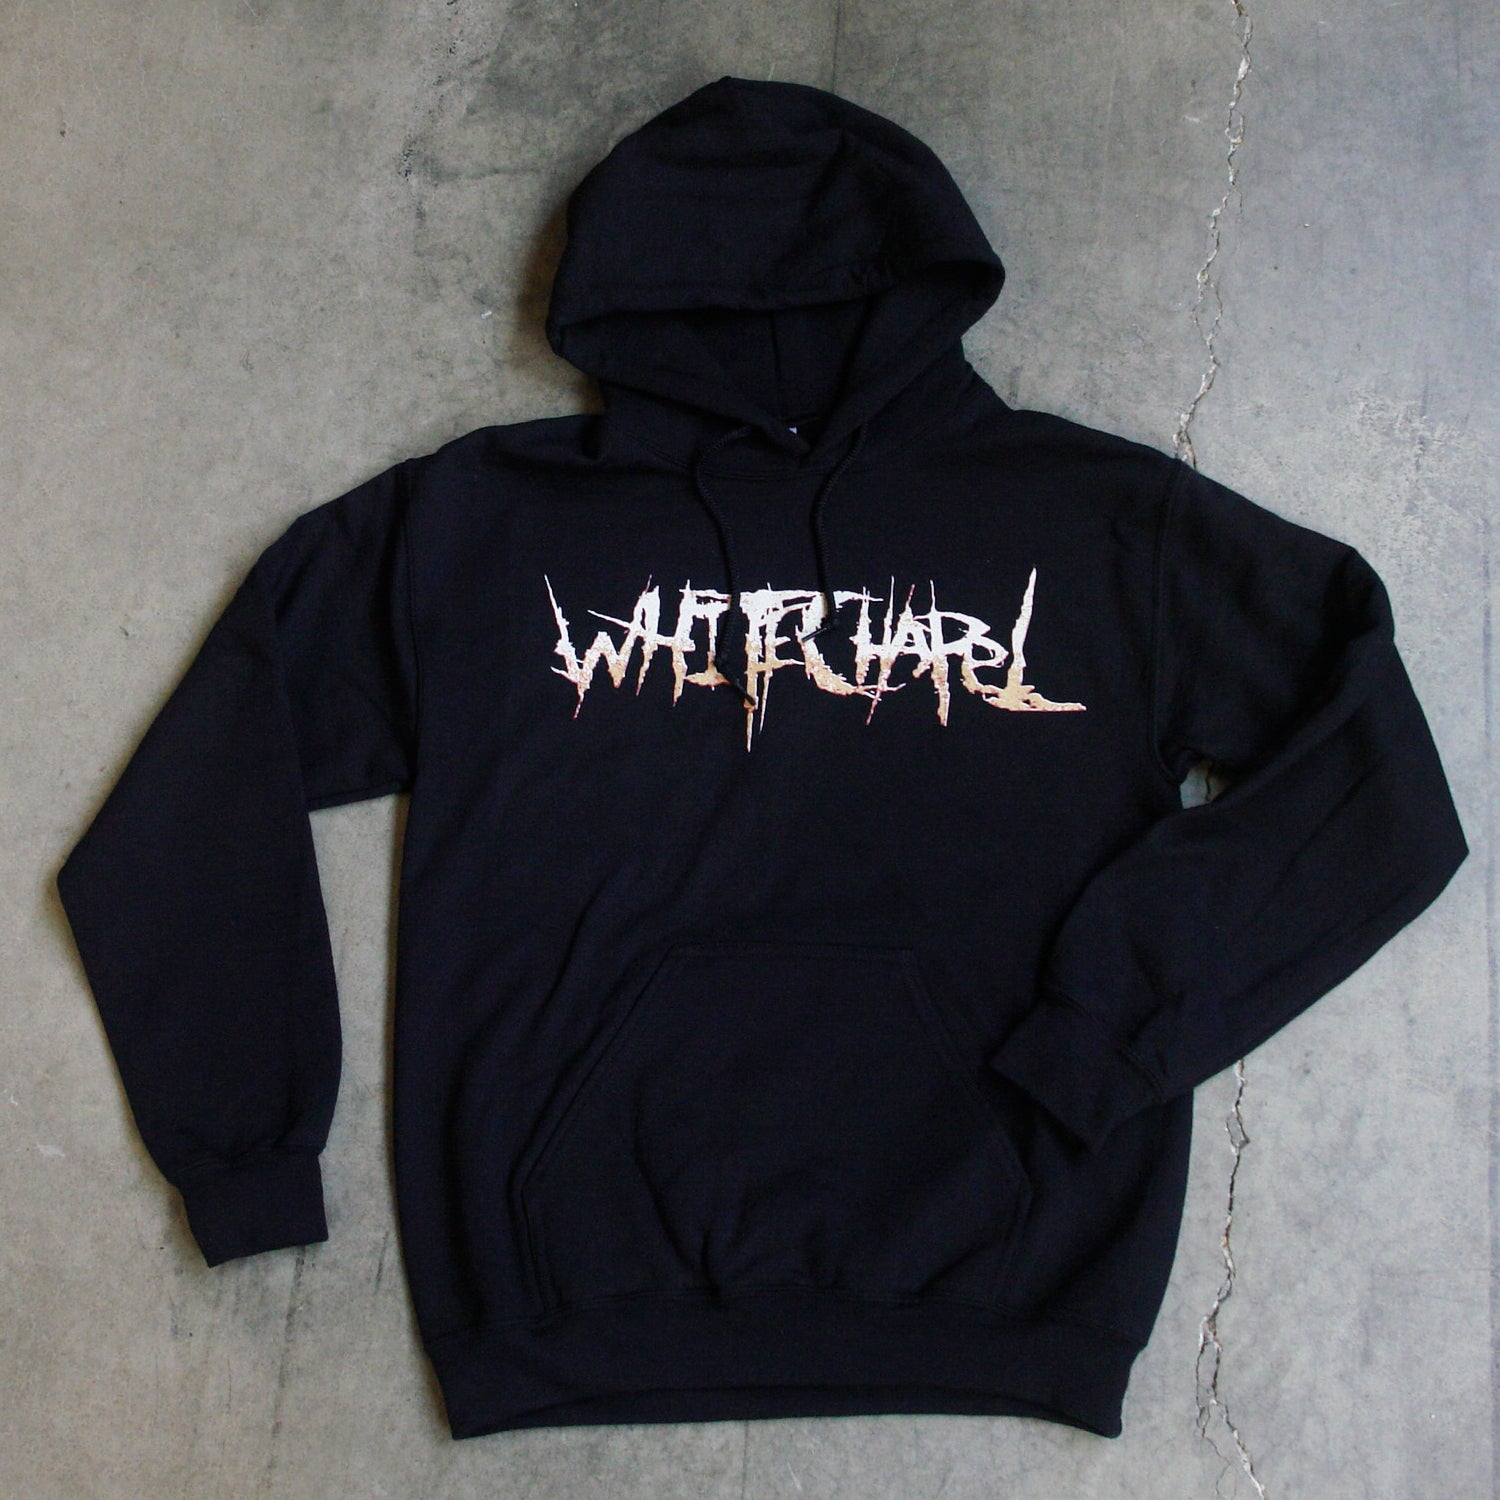 Image of the front of a black hooded sweatshirt against a grey concrete background. Across the chest in white to light orange gradient in heavy metal font reads whitechapel.